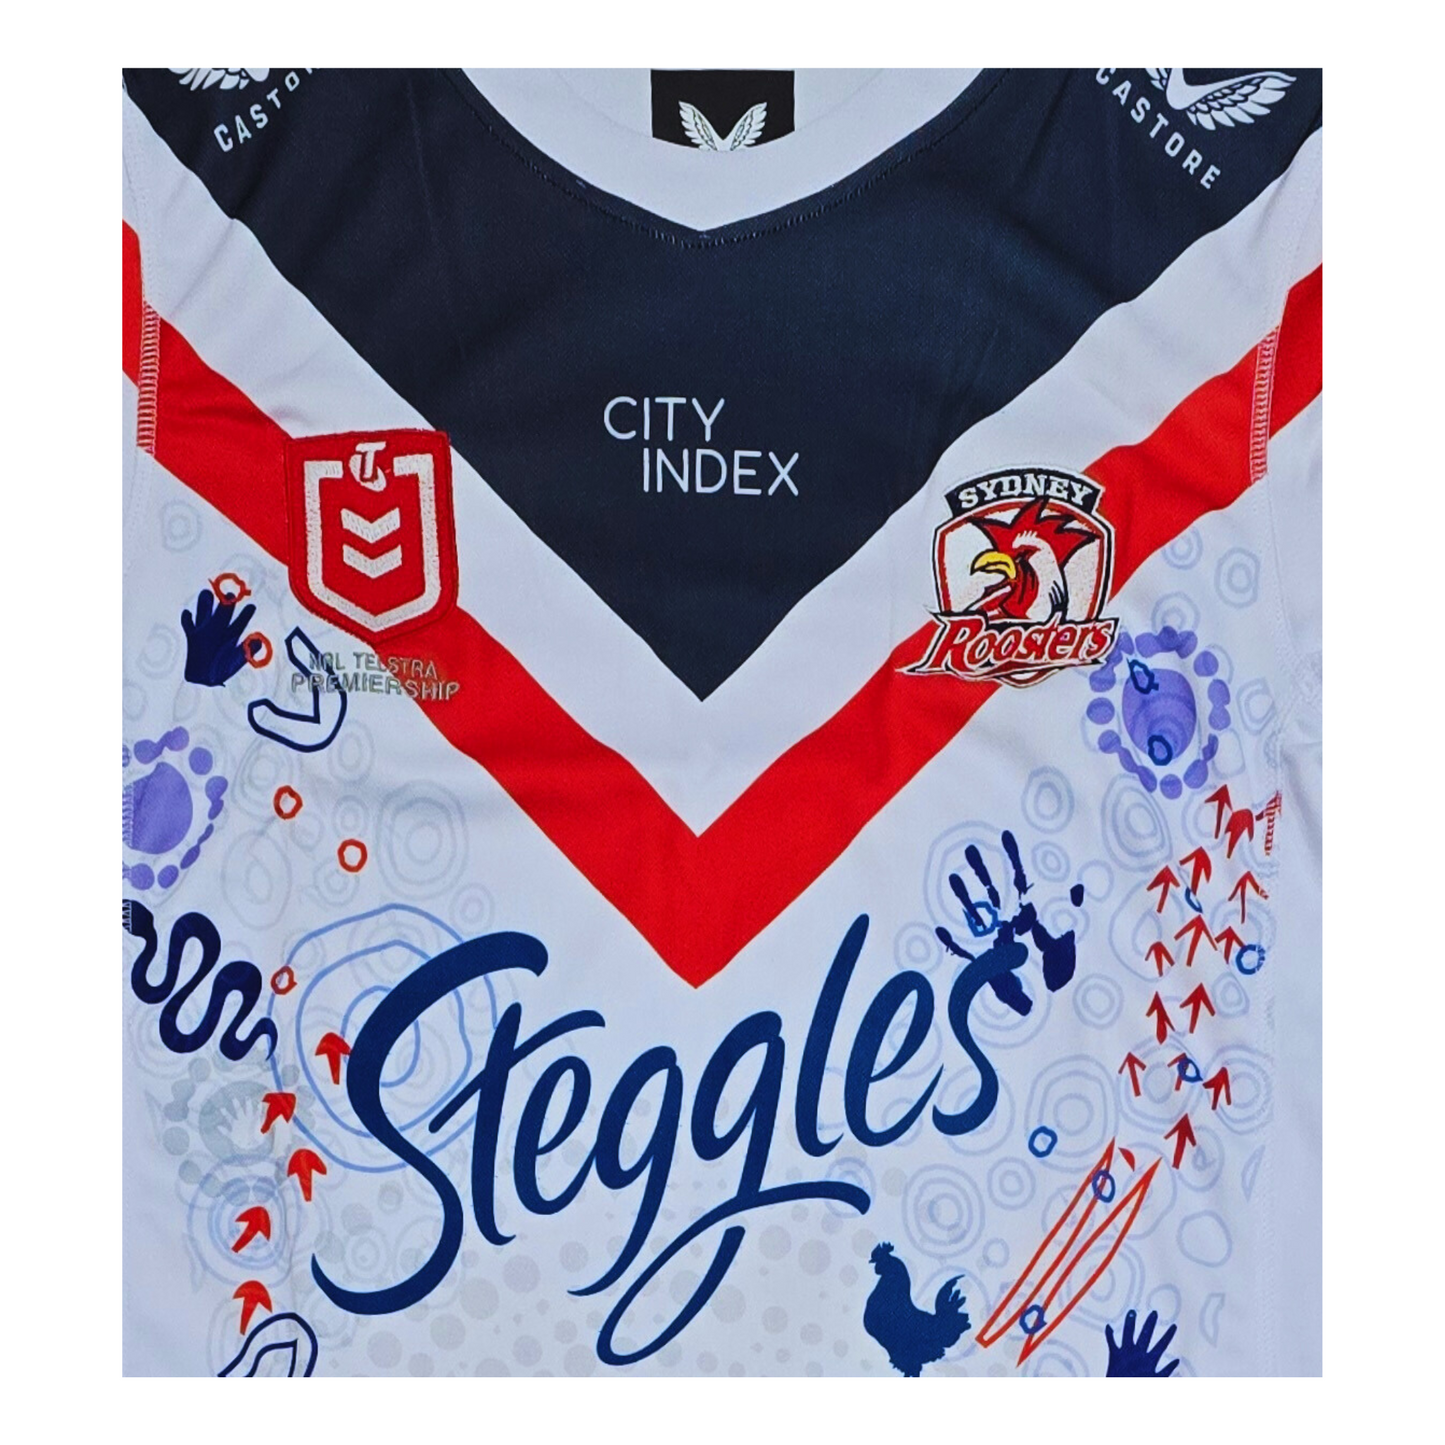 Sydney Roosters 2022 Indigenous Jersey